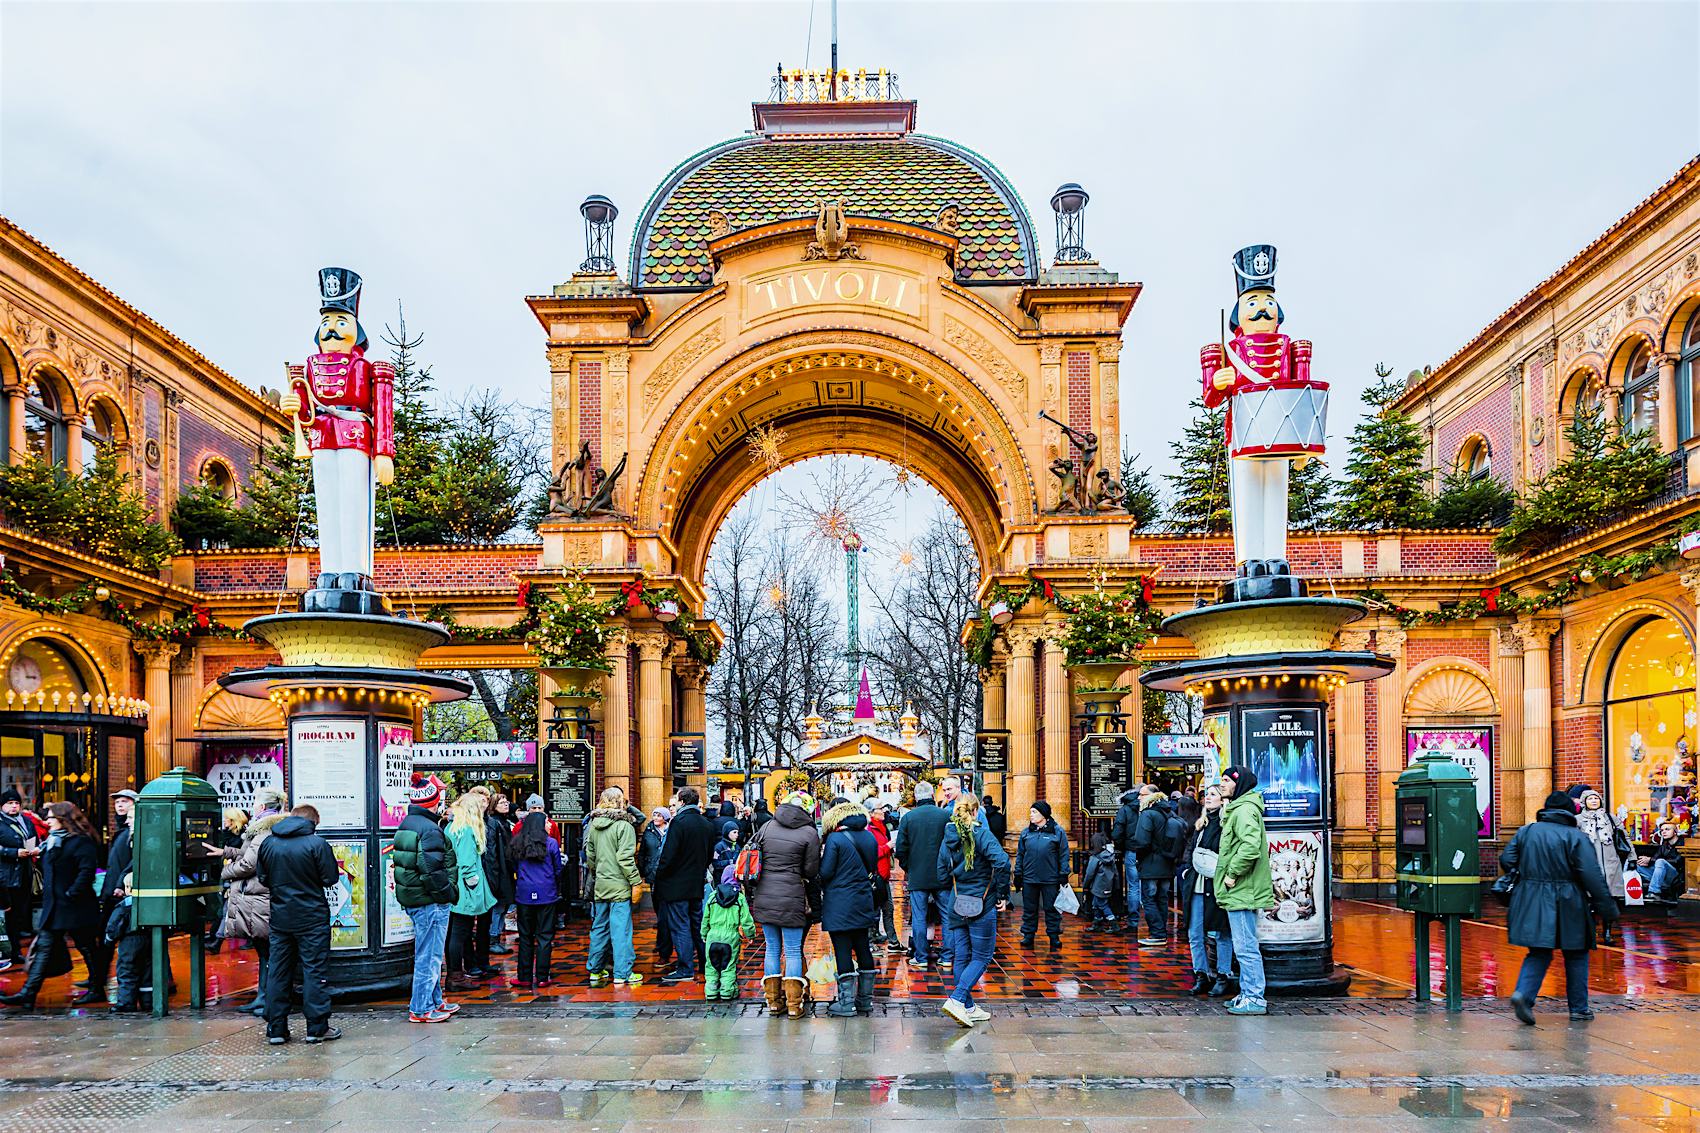 Christmas in Tivoli Gardens, the entrance pavilion with Christmas decorations.